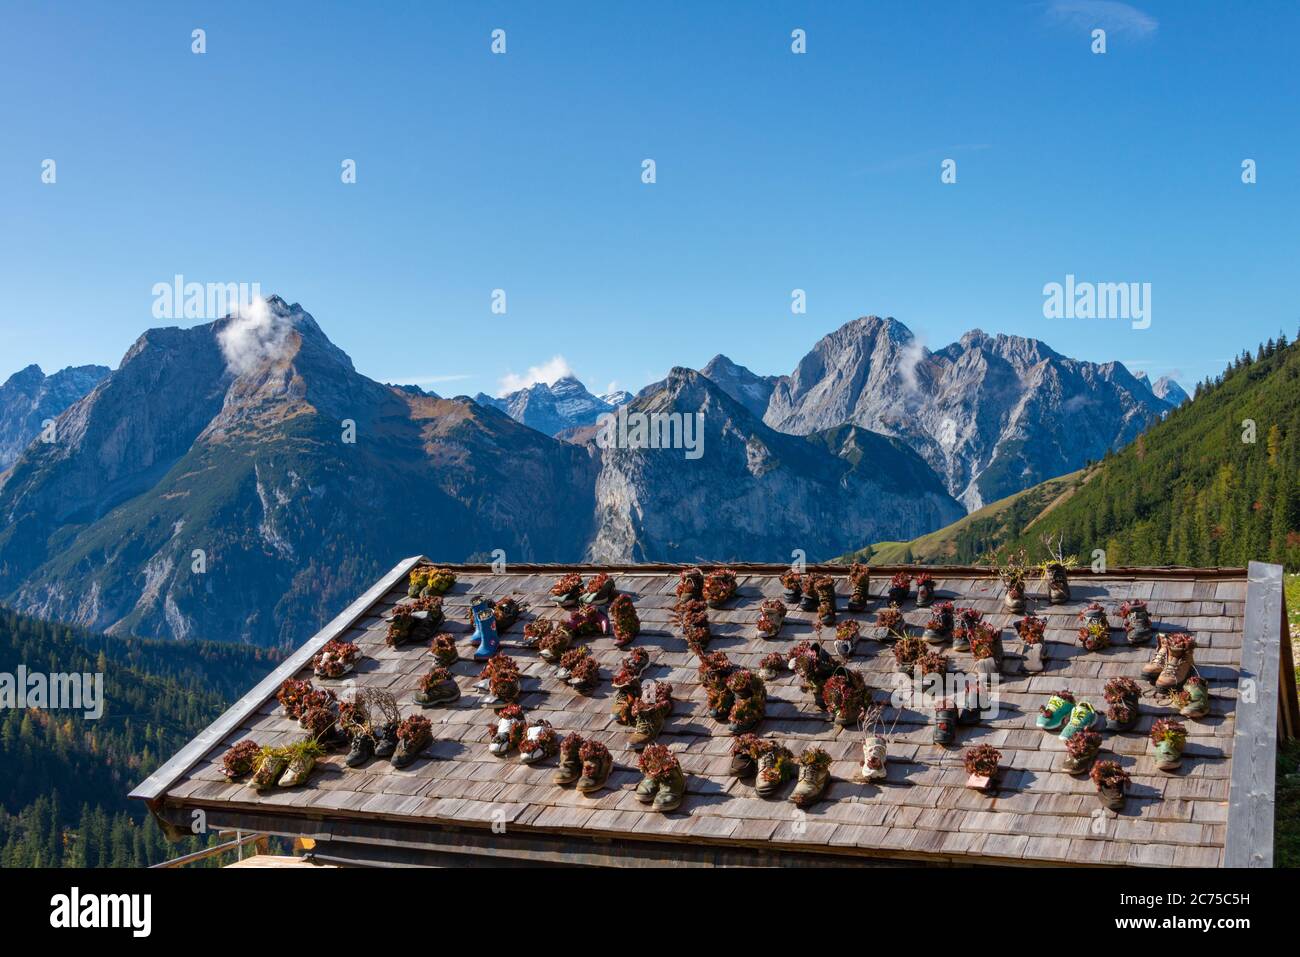 Plumsjochhütte, Karwendel mountains, Tirol, Austria. Roof covered in shoes used as plant pots Stock Photo